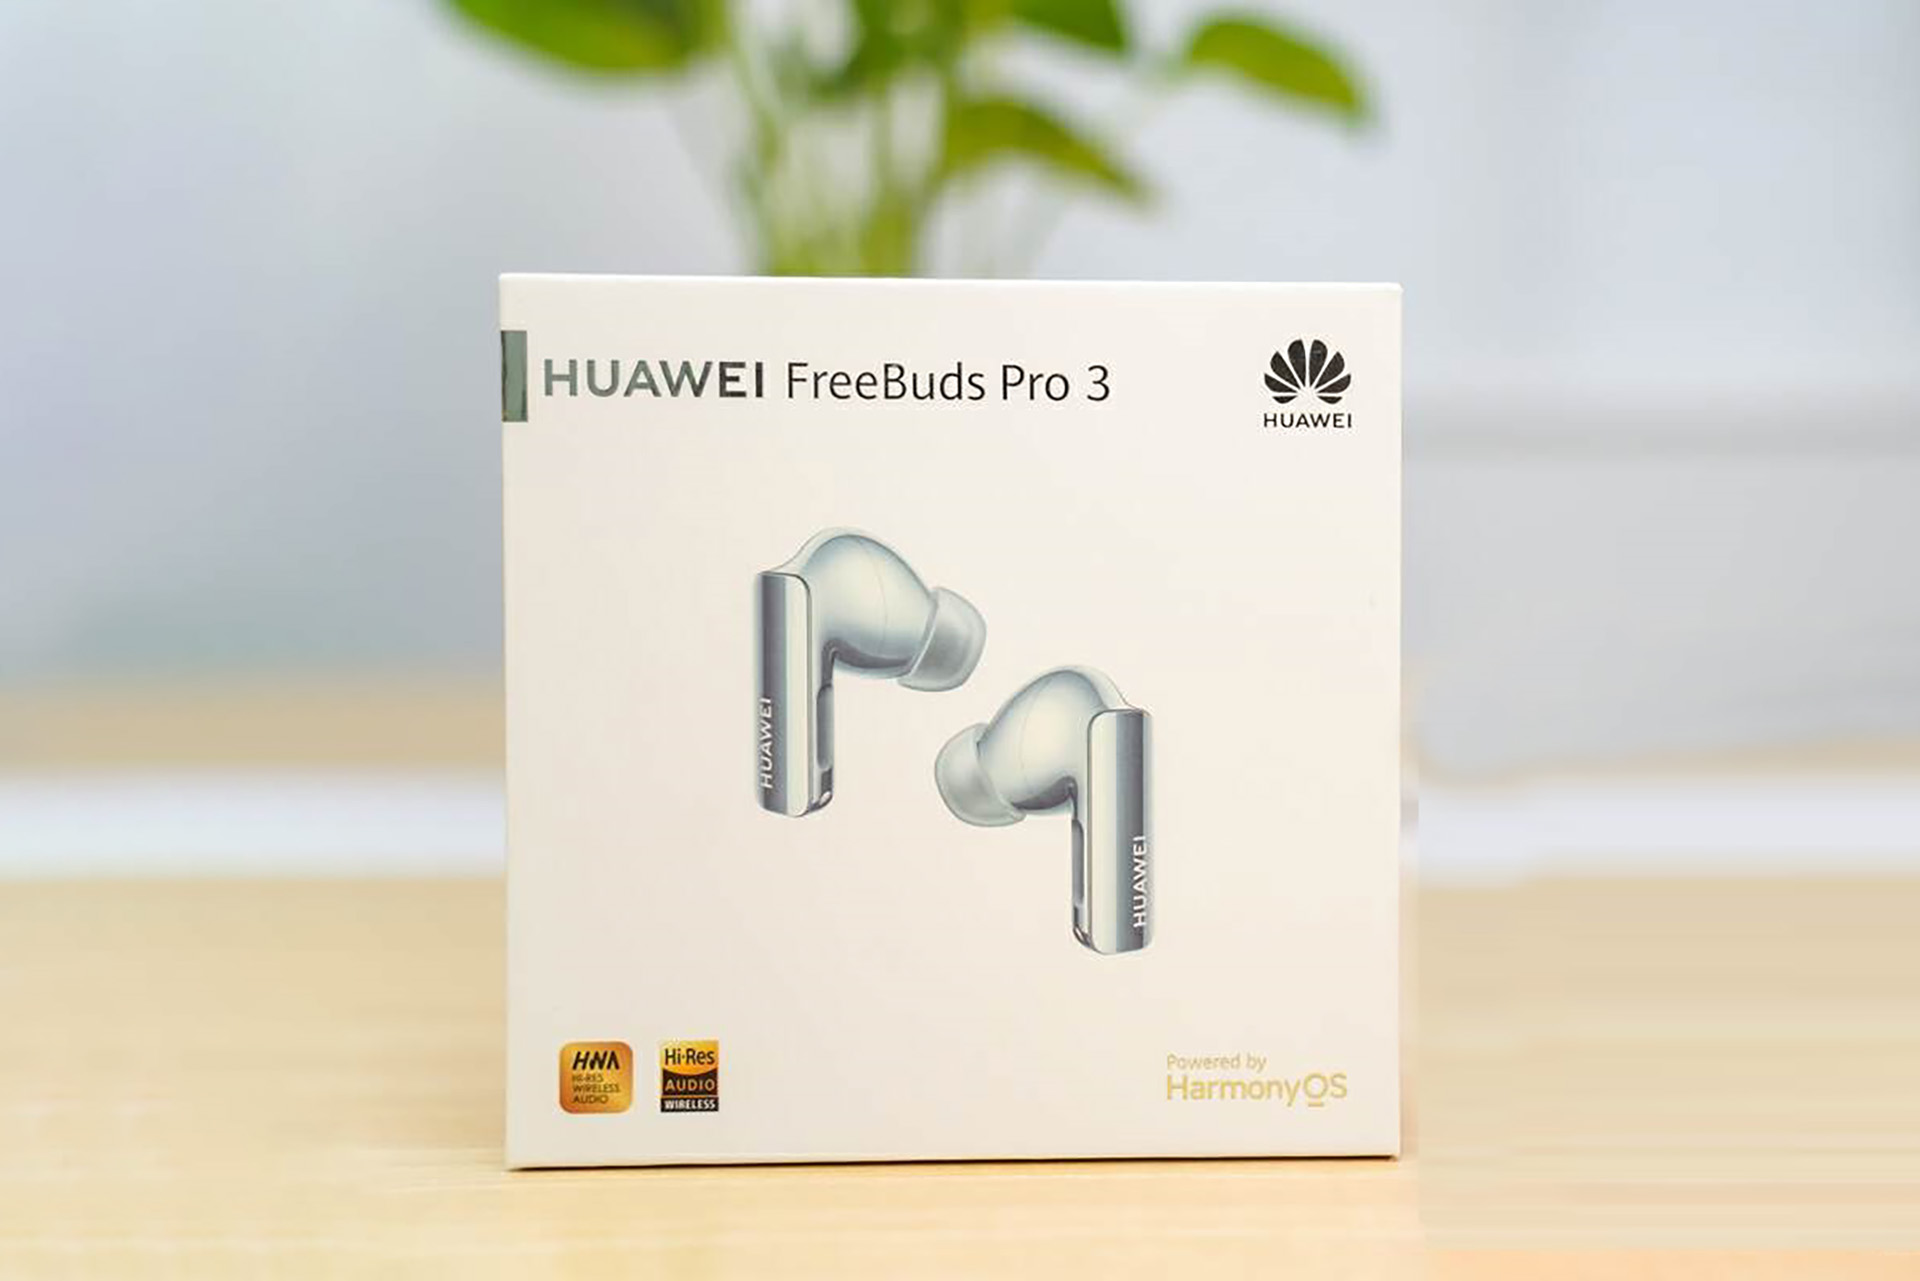 New Original Huawei FreeBuds Pro 3 Bluetooth Earphone Active Noise  Cancellation